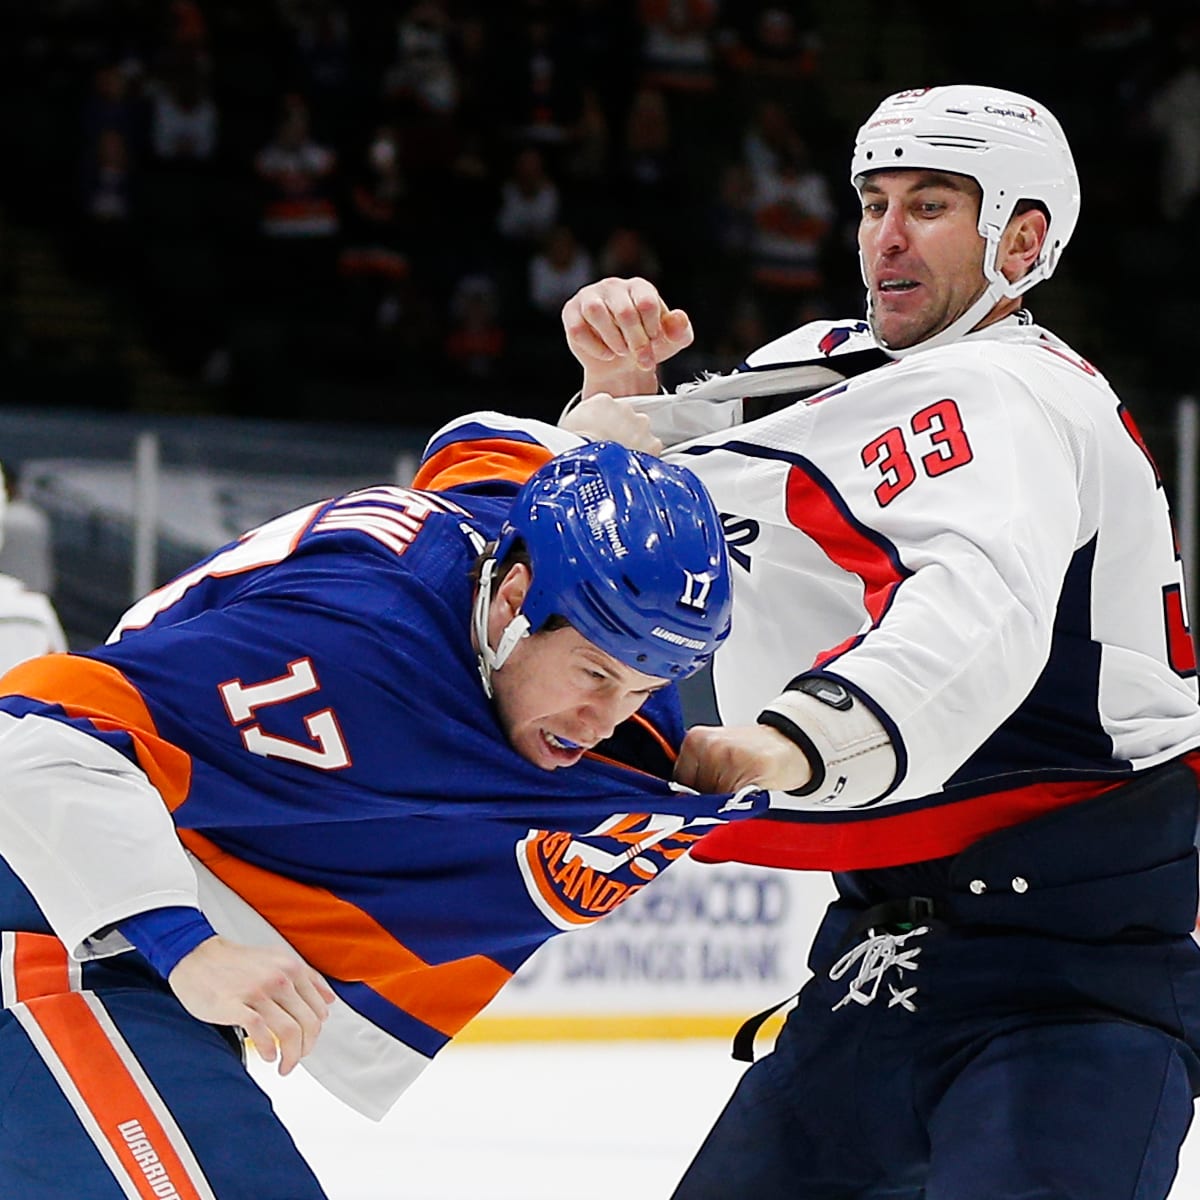 FULL CIRCLE': Zdeno Chara returns to Islanders two decades later